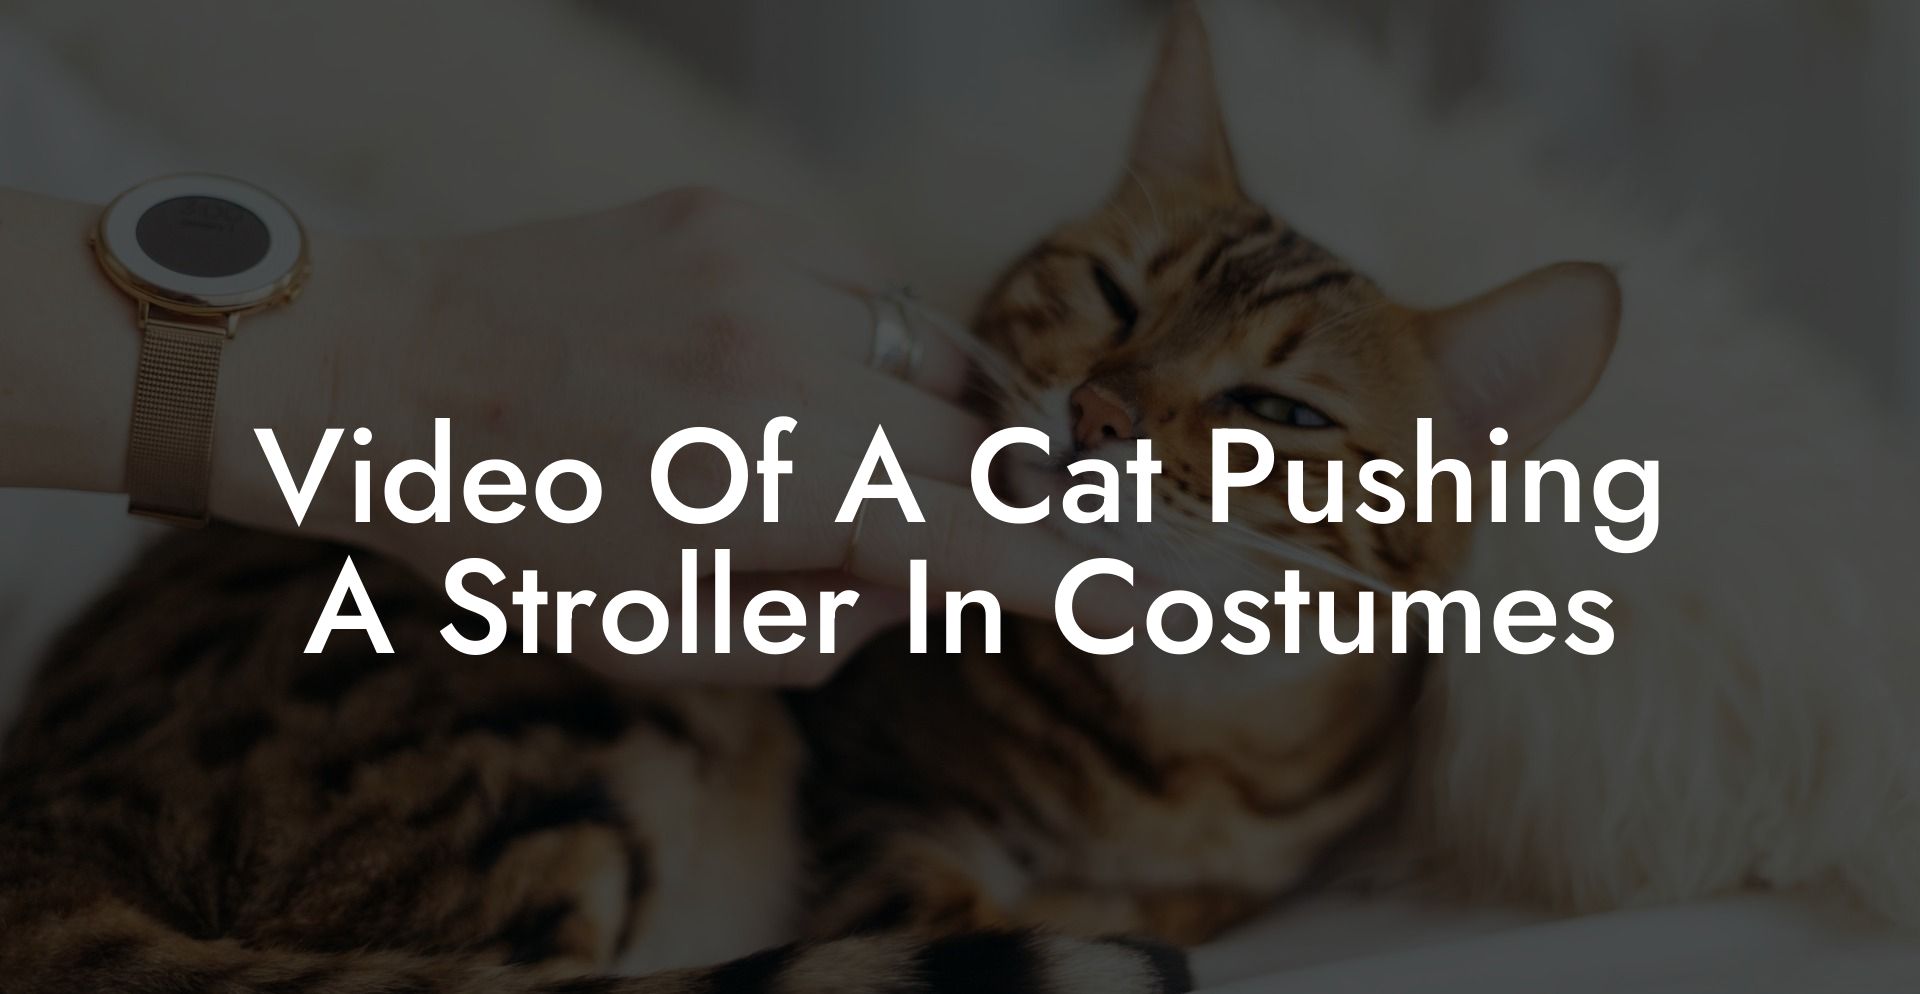 Video Of A Cat Pushing A Stroller In Costumes